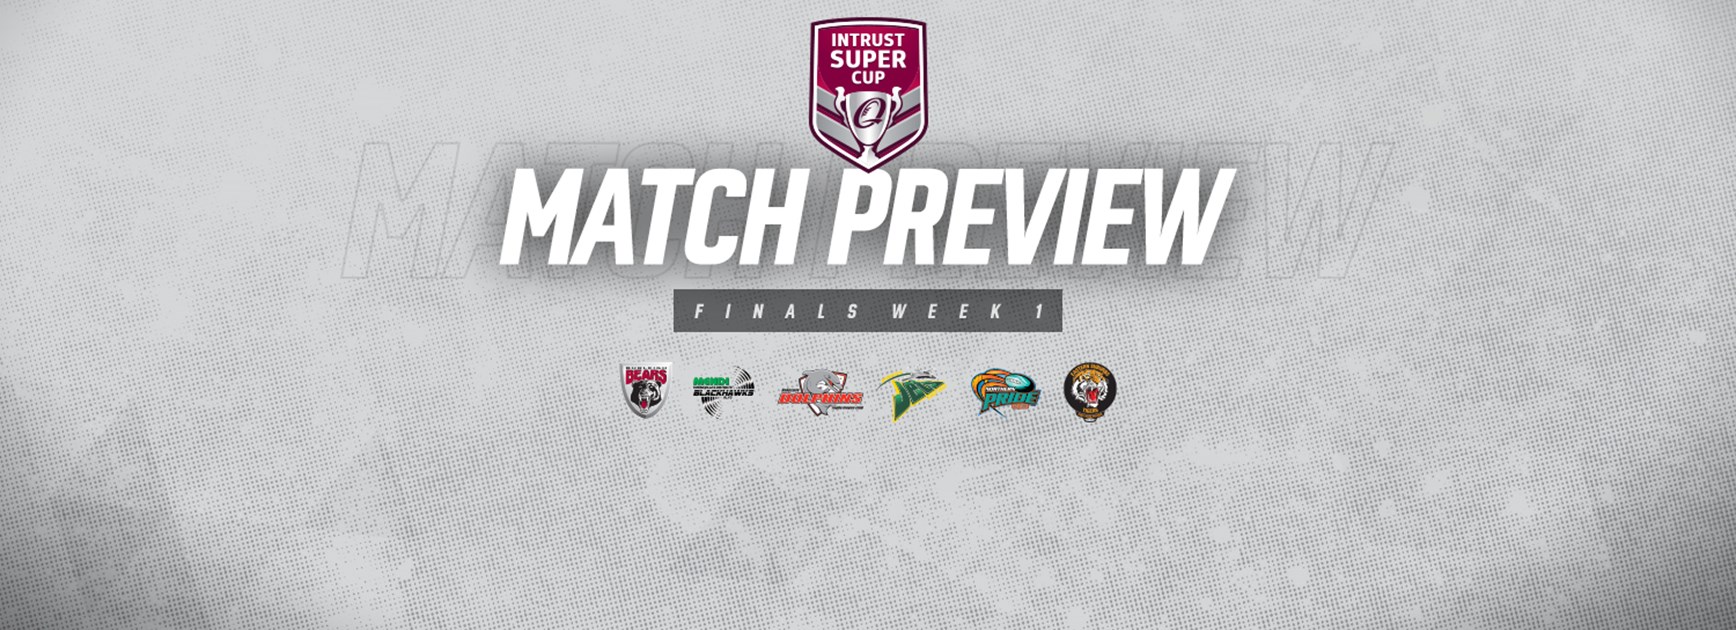 Finals Week 1 Preview: past GF opponents add to rivalry